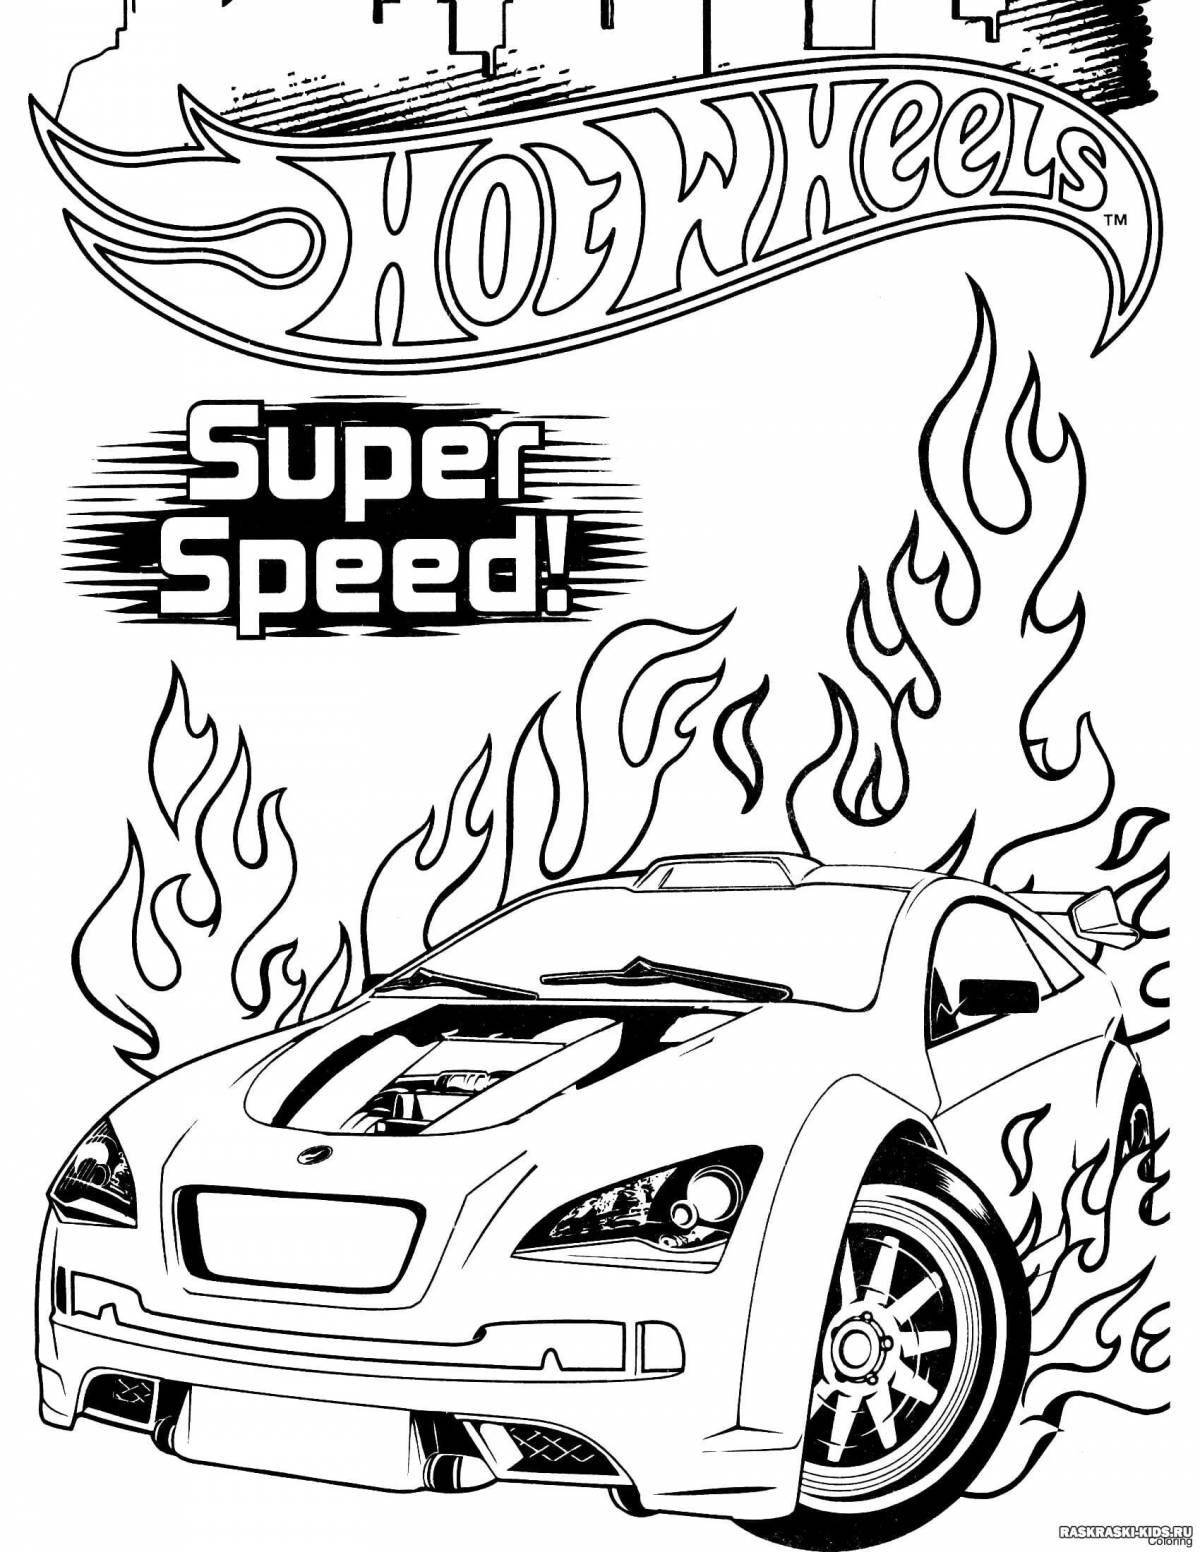 Outstanding coloring book supercars magazine